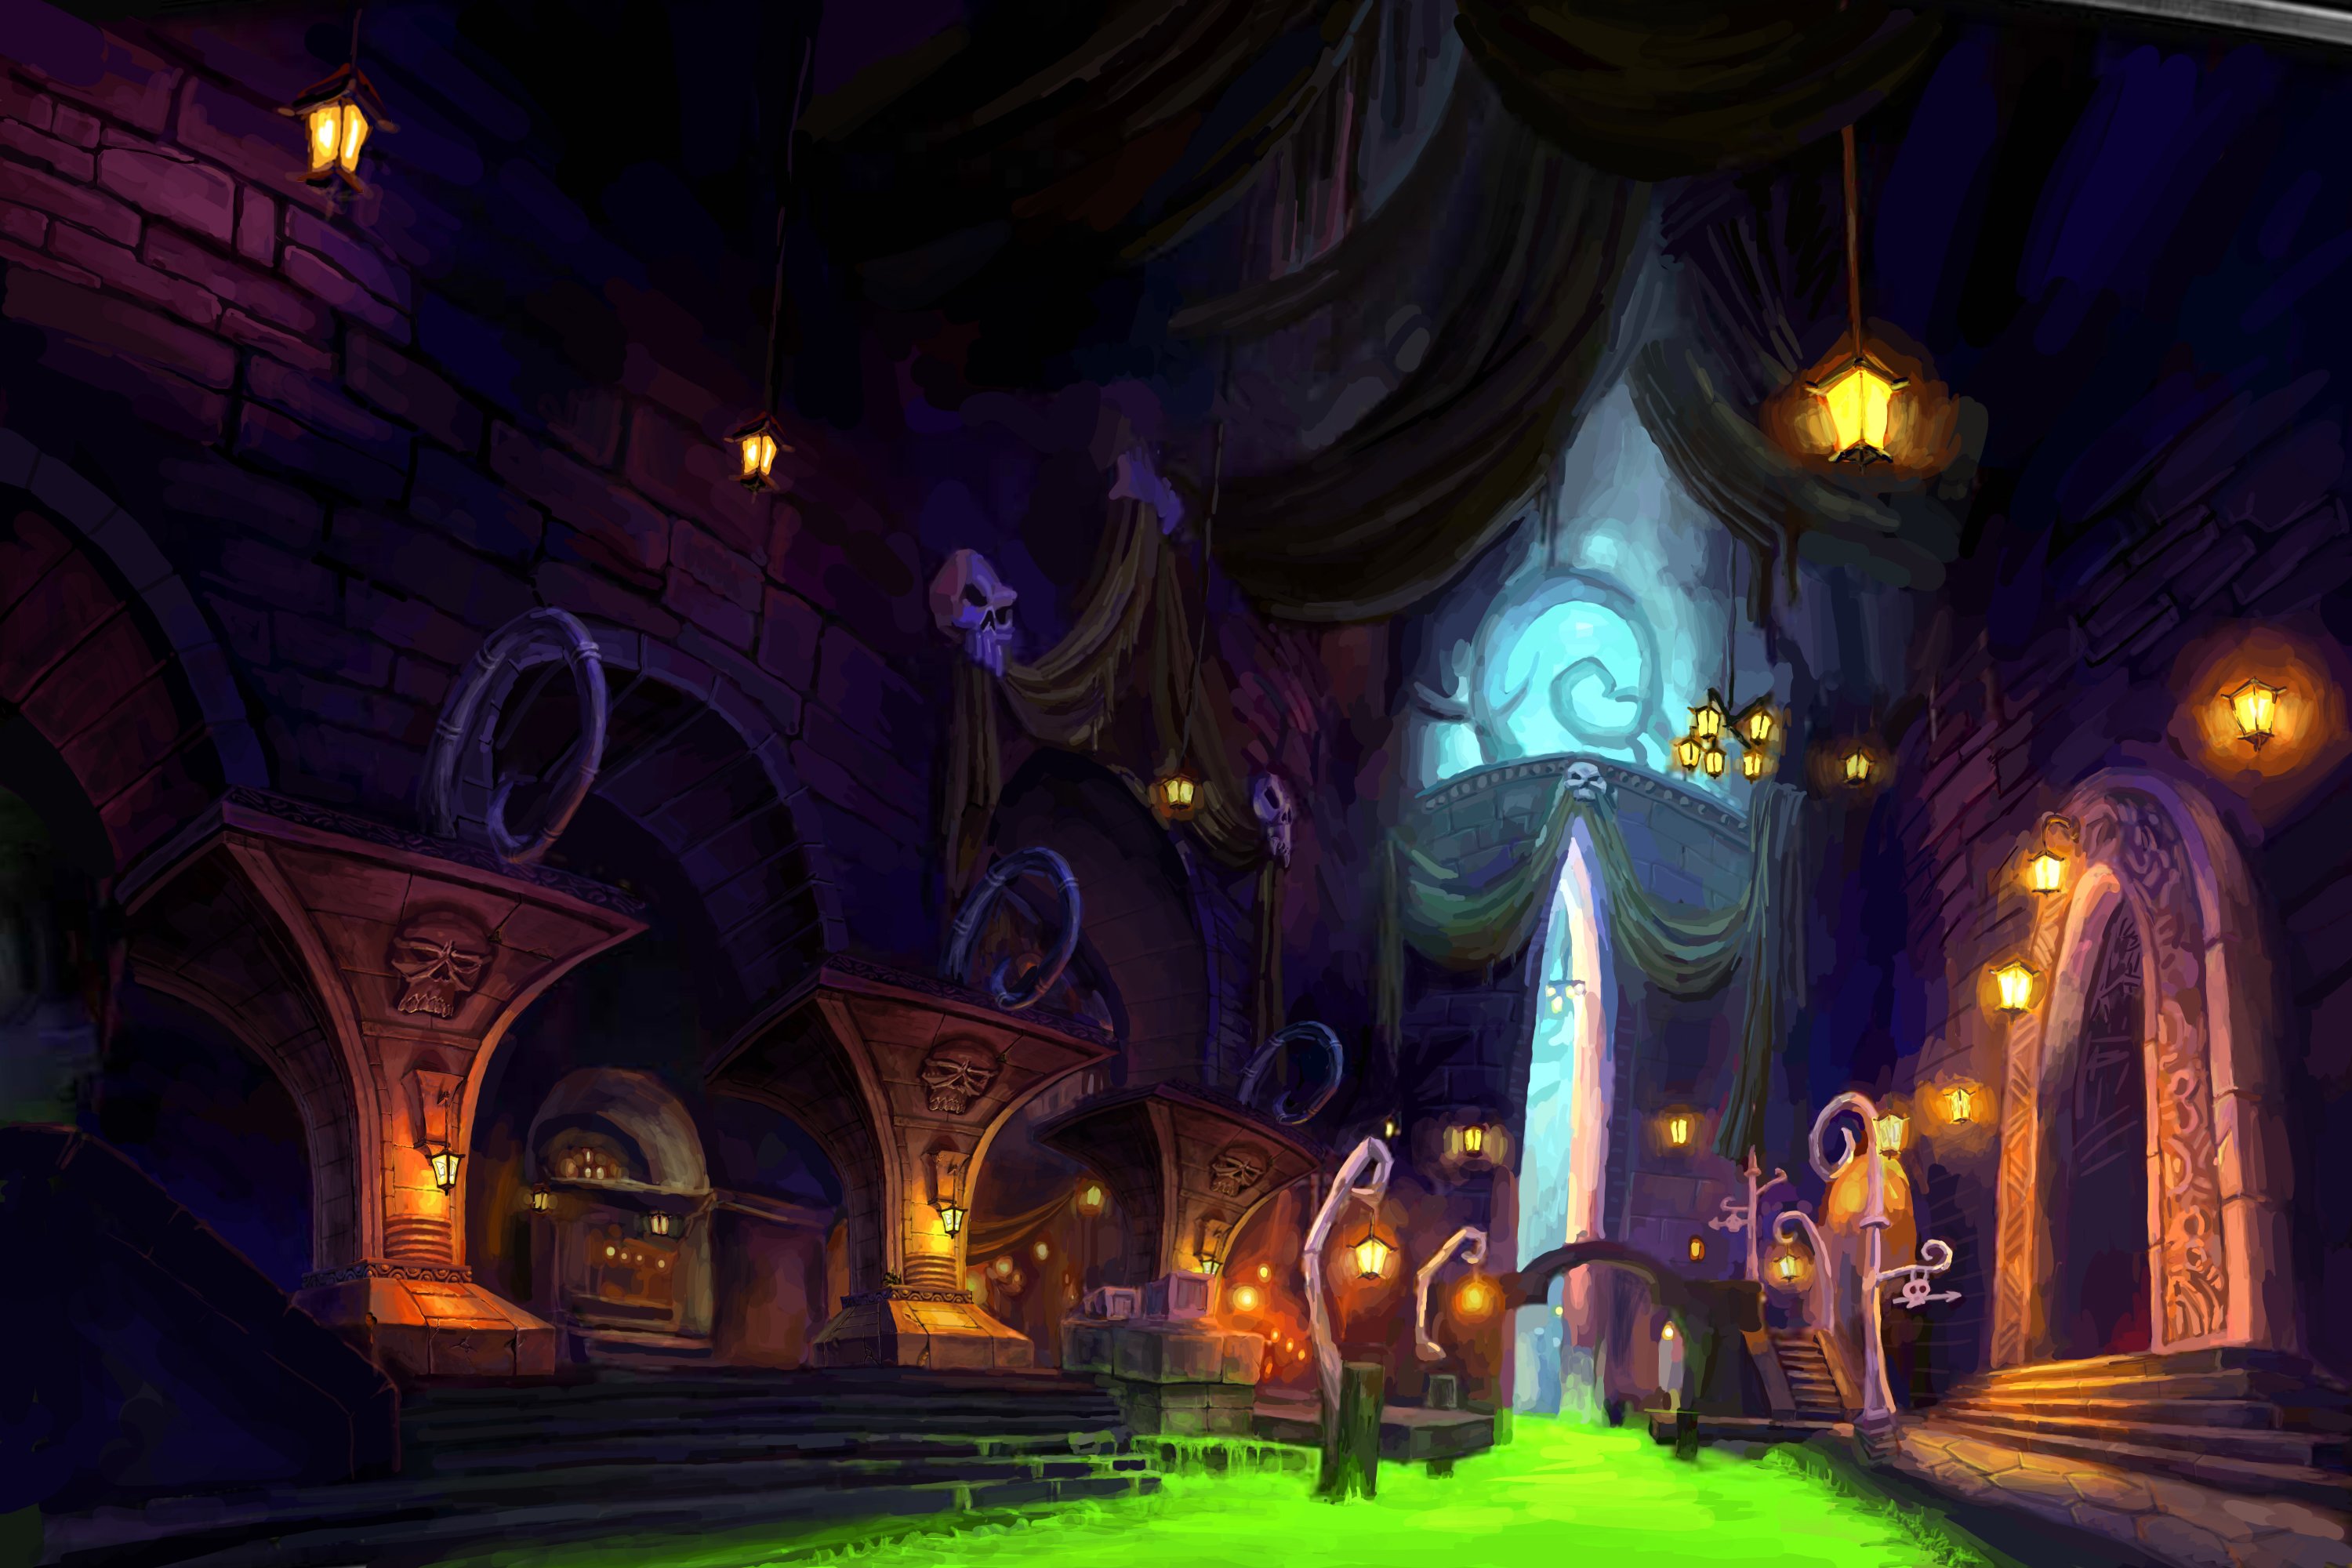 Undercity 4K wallpaper for your desktop or mobile screen free and easy to download